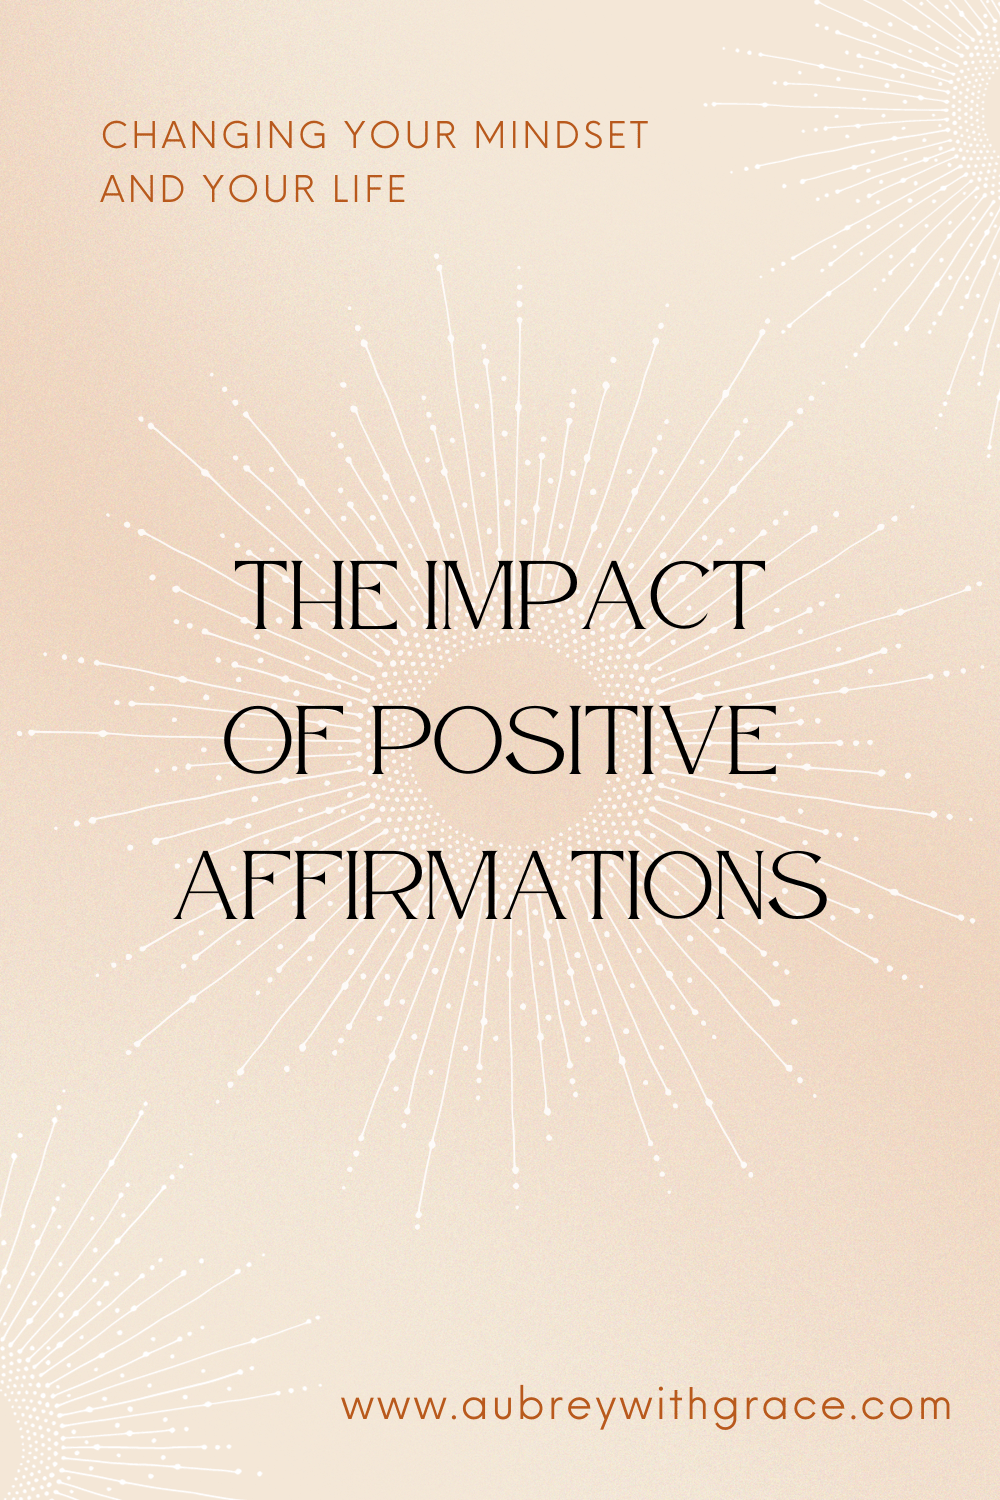 The impact of positive affirmations